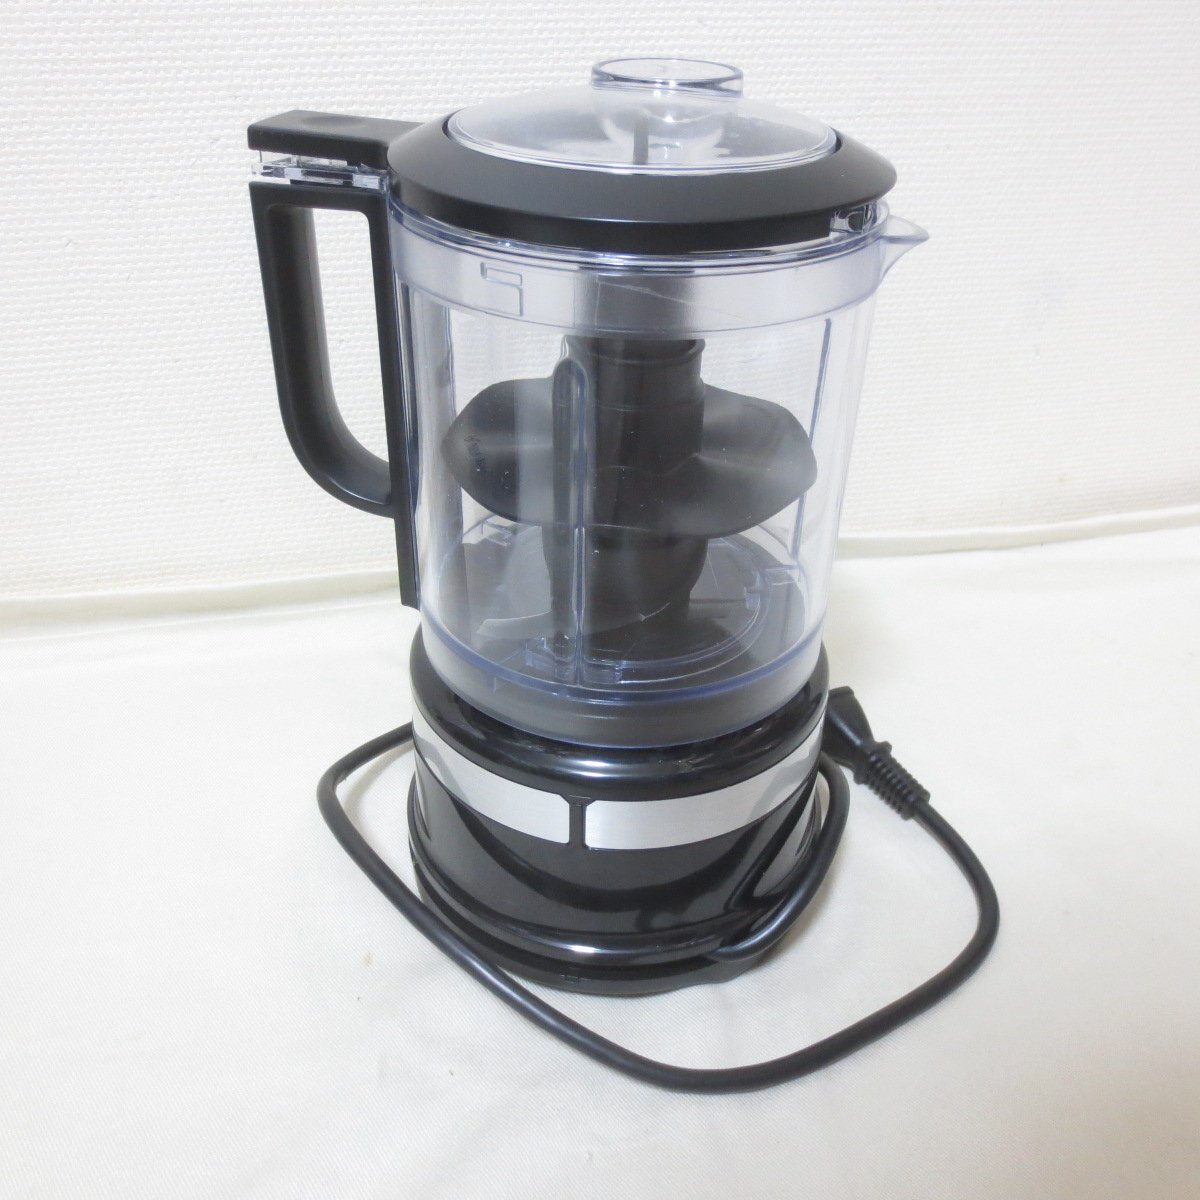 BO02 unused KitchenAid 5C food processor kitchen aid mixer 1.1L black 9KFC0516 cookware [ including in a package ×]